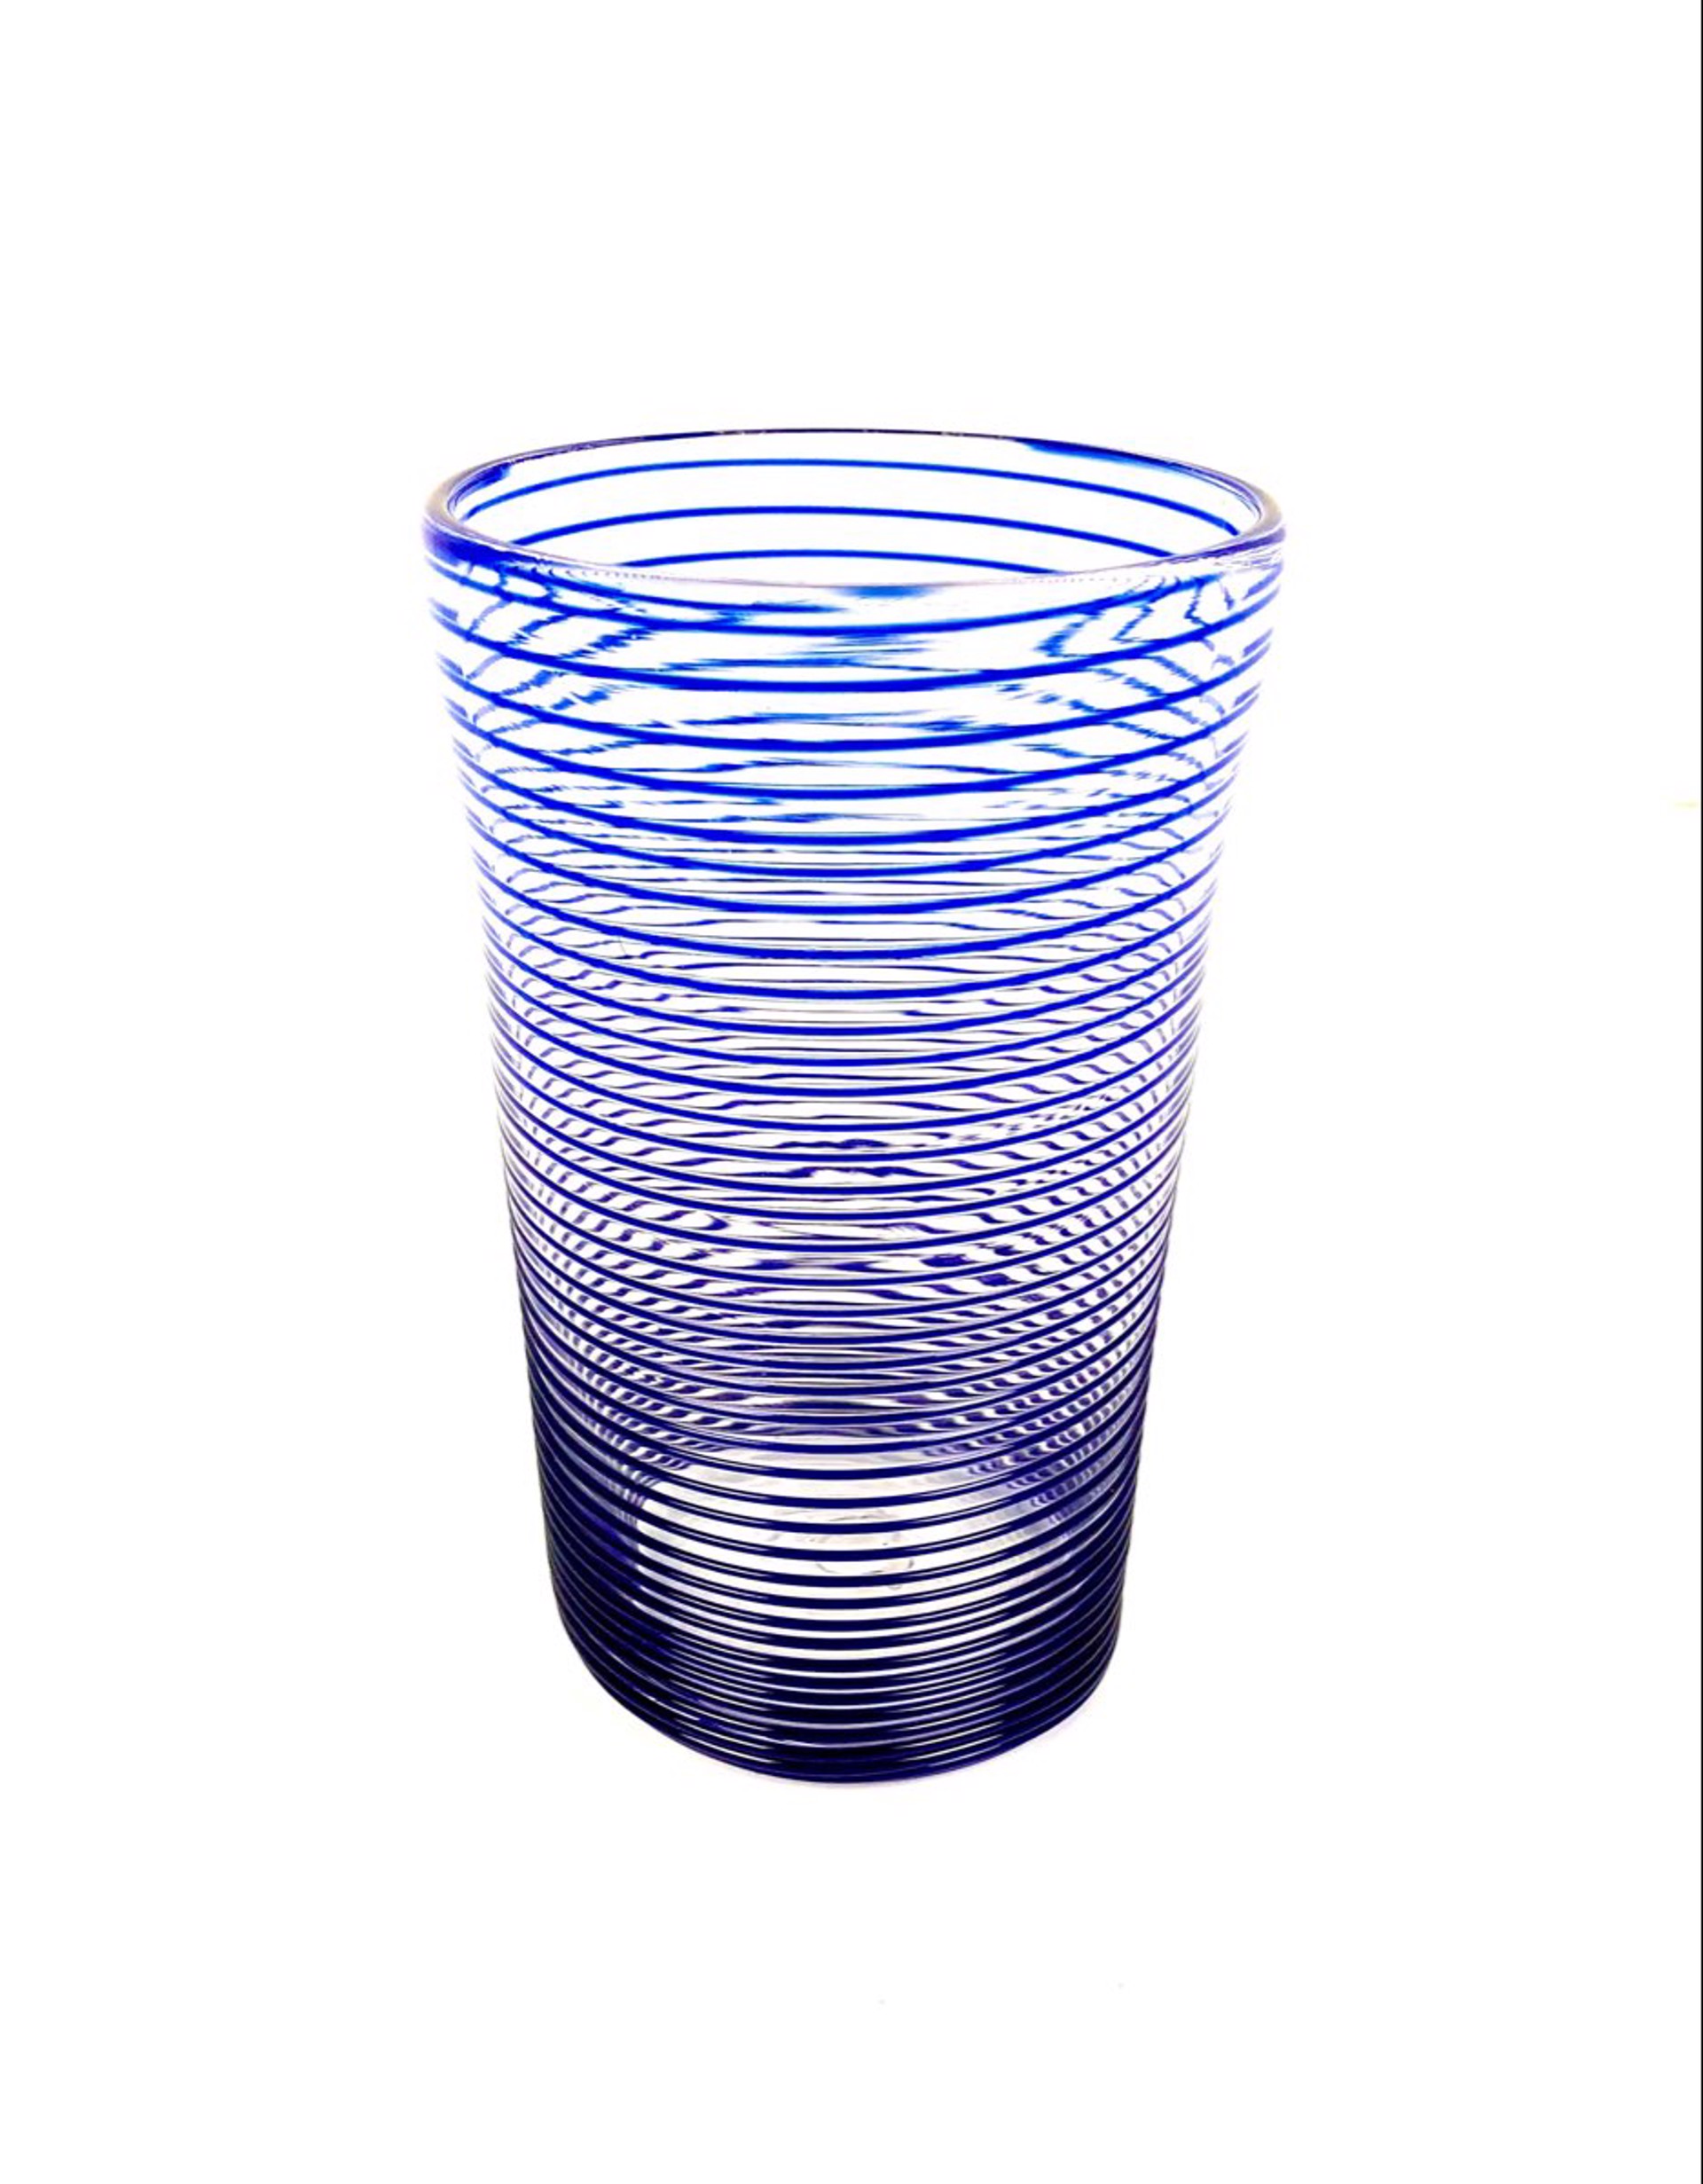 Threaded Tumblers by Chad Balster